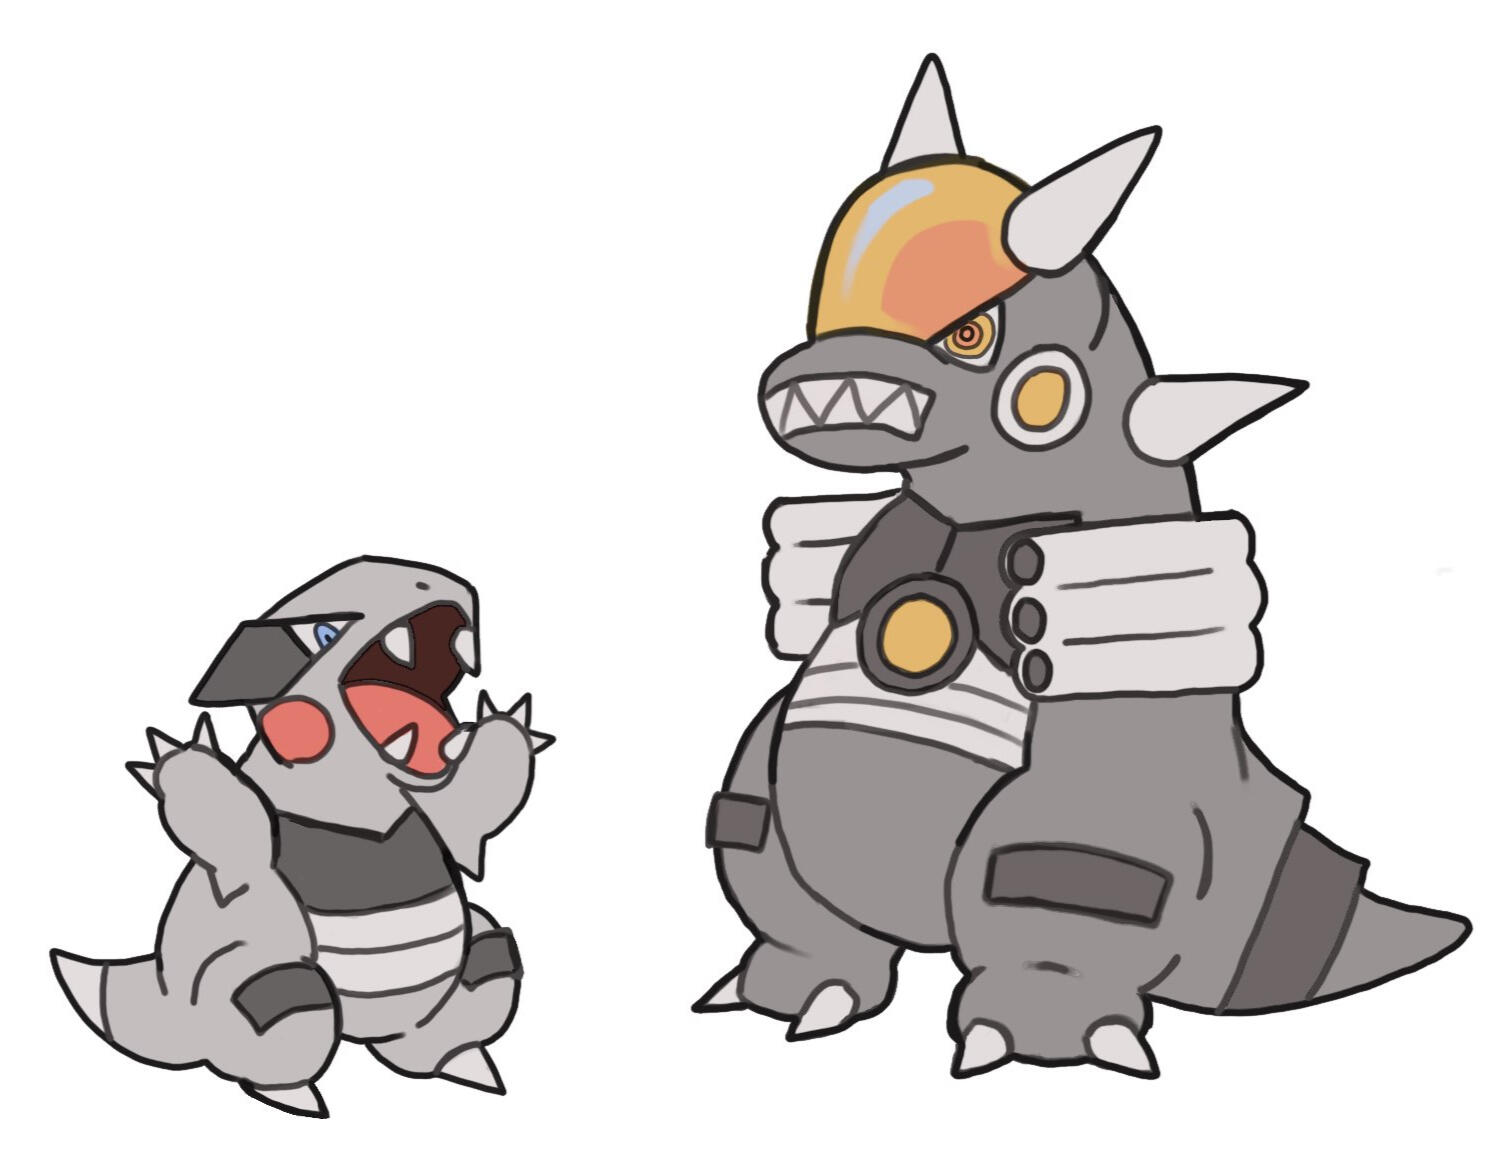 Unlike many other of my pokemon speculation designs, this one is based off a beta concept for a pokemon that never became real- ultimately based upon a few blurry pixels and a concept of a mecha-godzilla-like pokemon. Done in 2019.